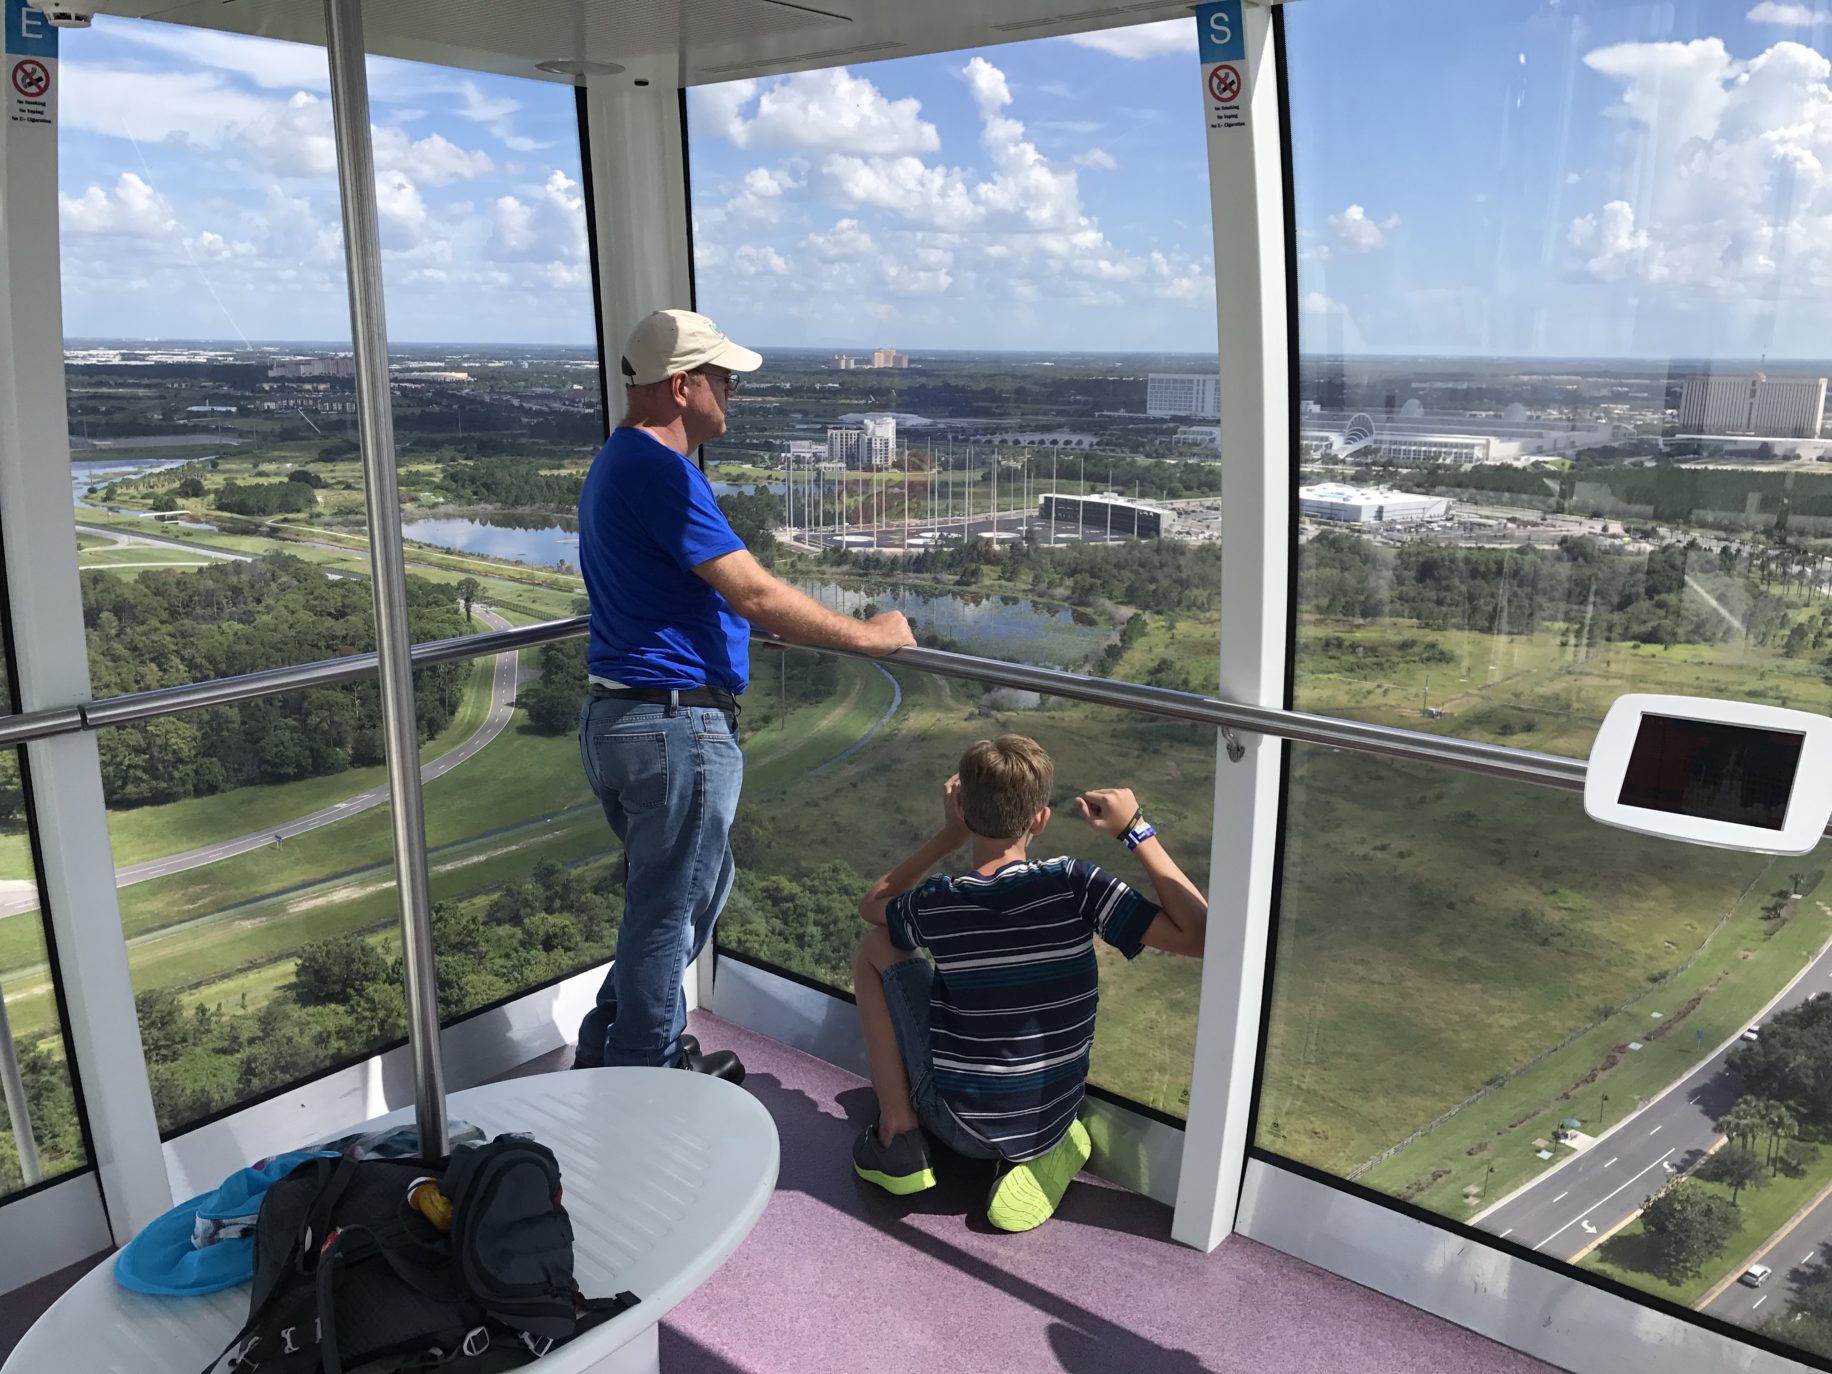 Relax and enjoy the view of the Orlando Eye  Image: Dakster Sullivan